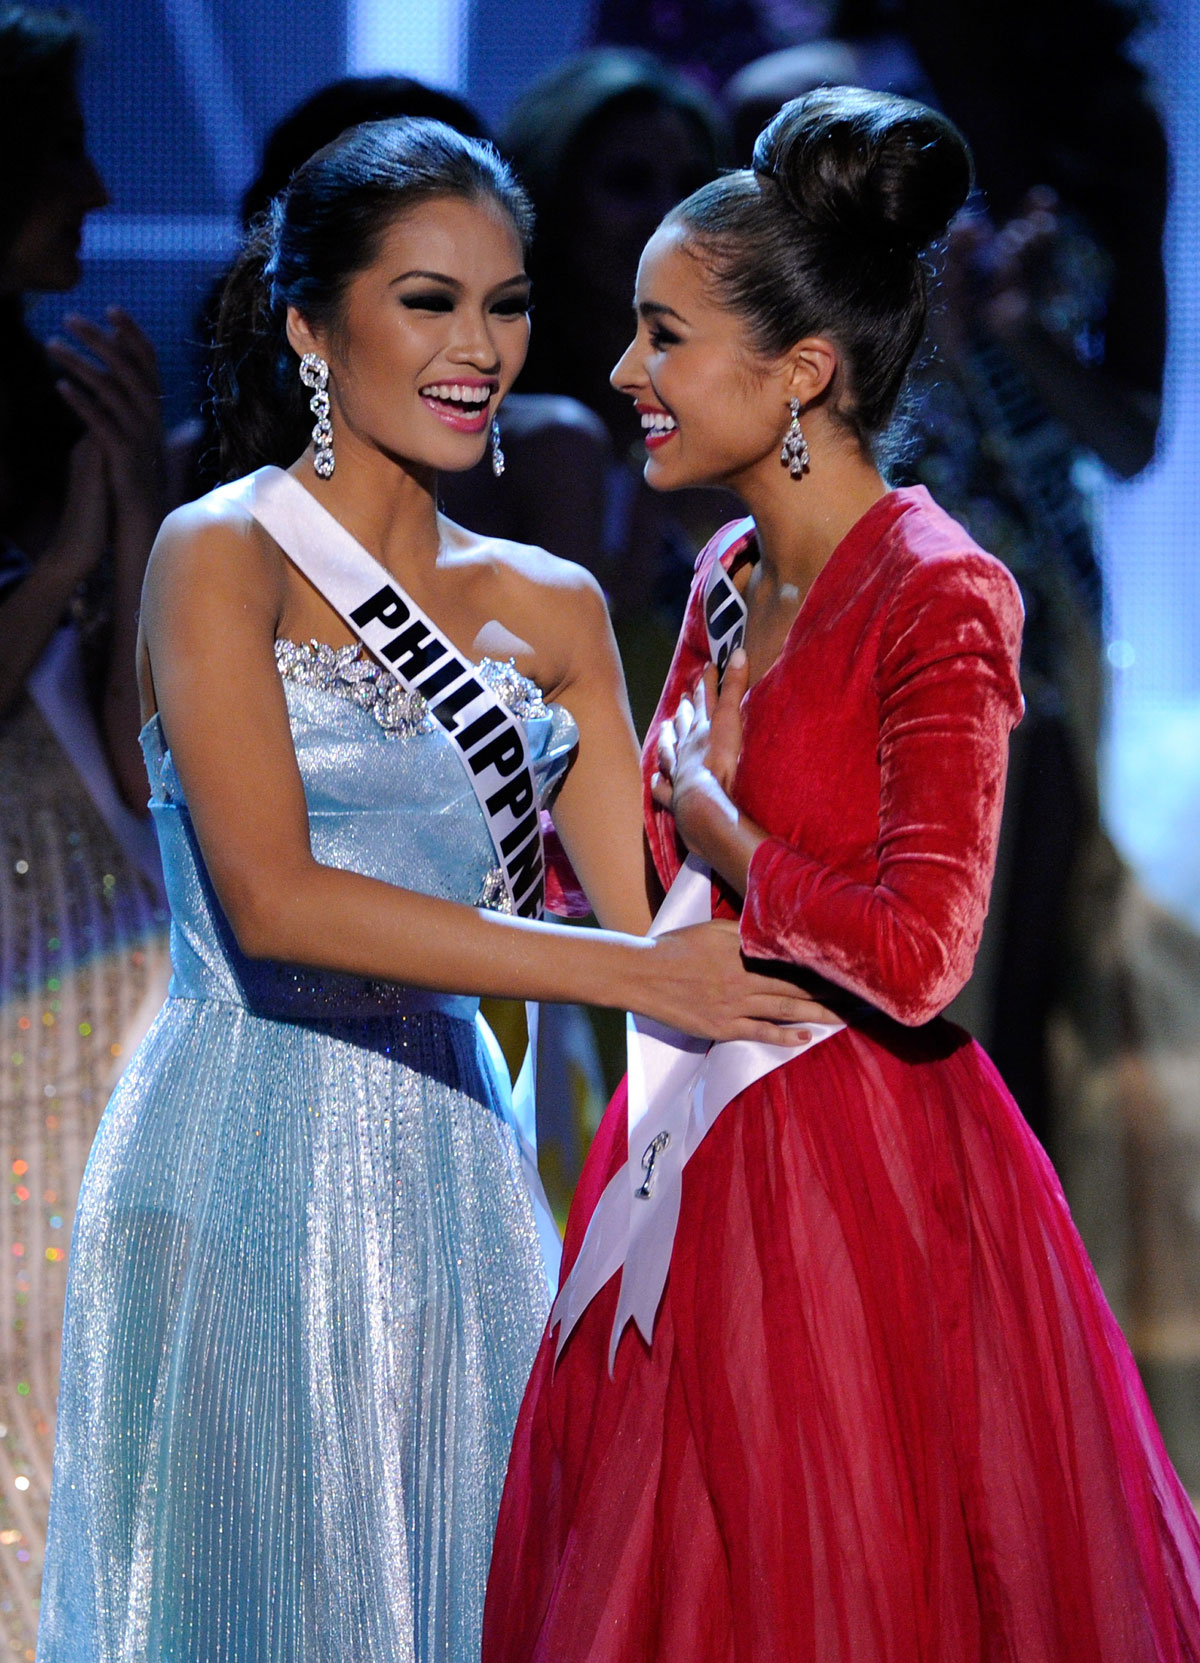 OLIVIA-CULPO-as-Miss-Universe-at-the-2012-Miss-Universe-Pageant-in-Las-Vegas-8.jpg